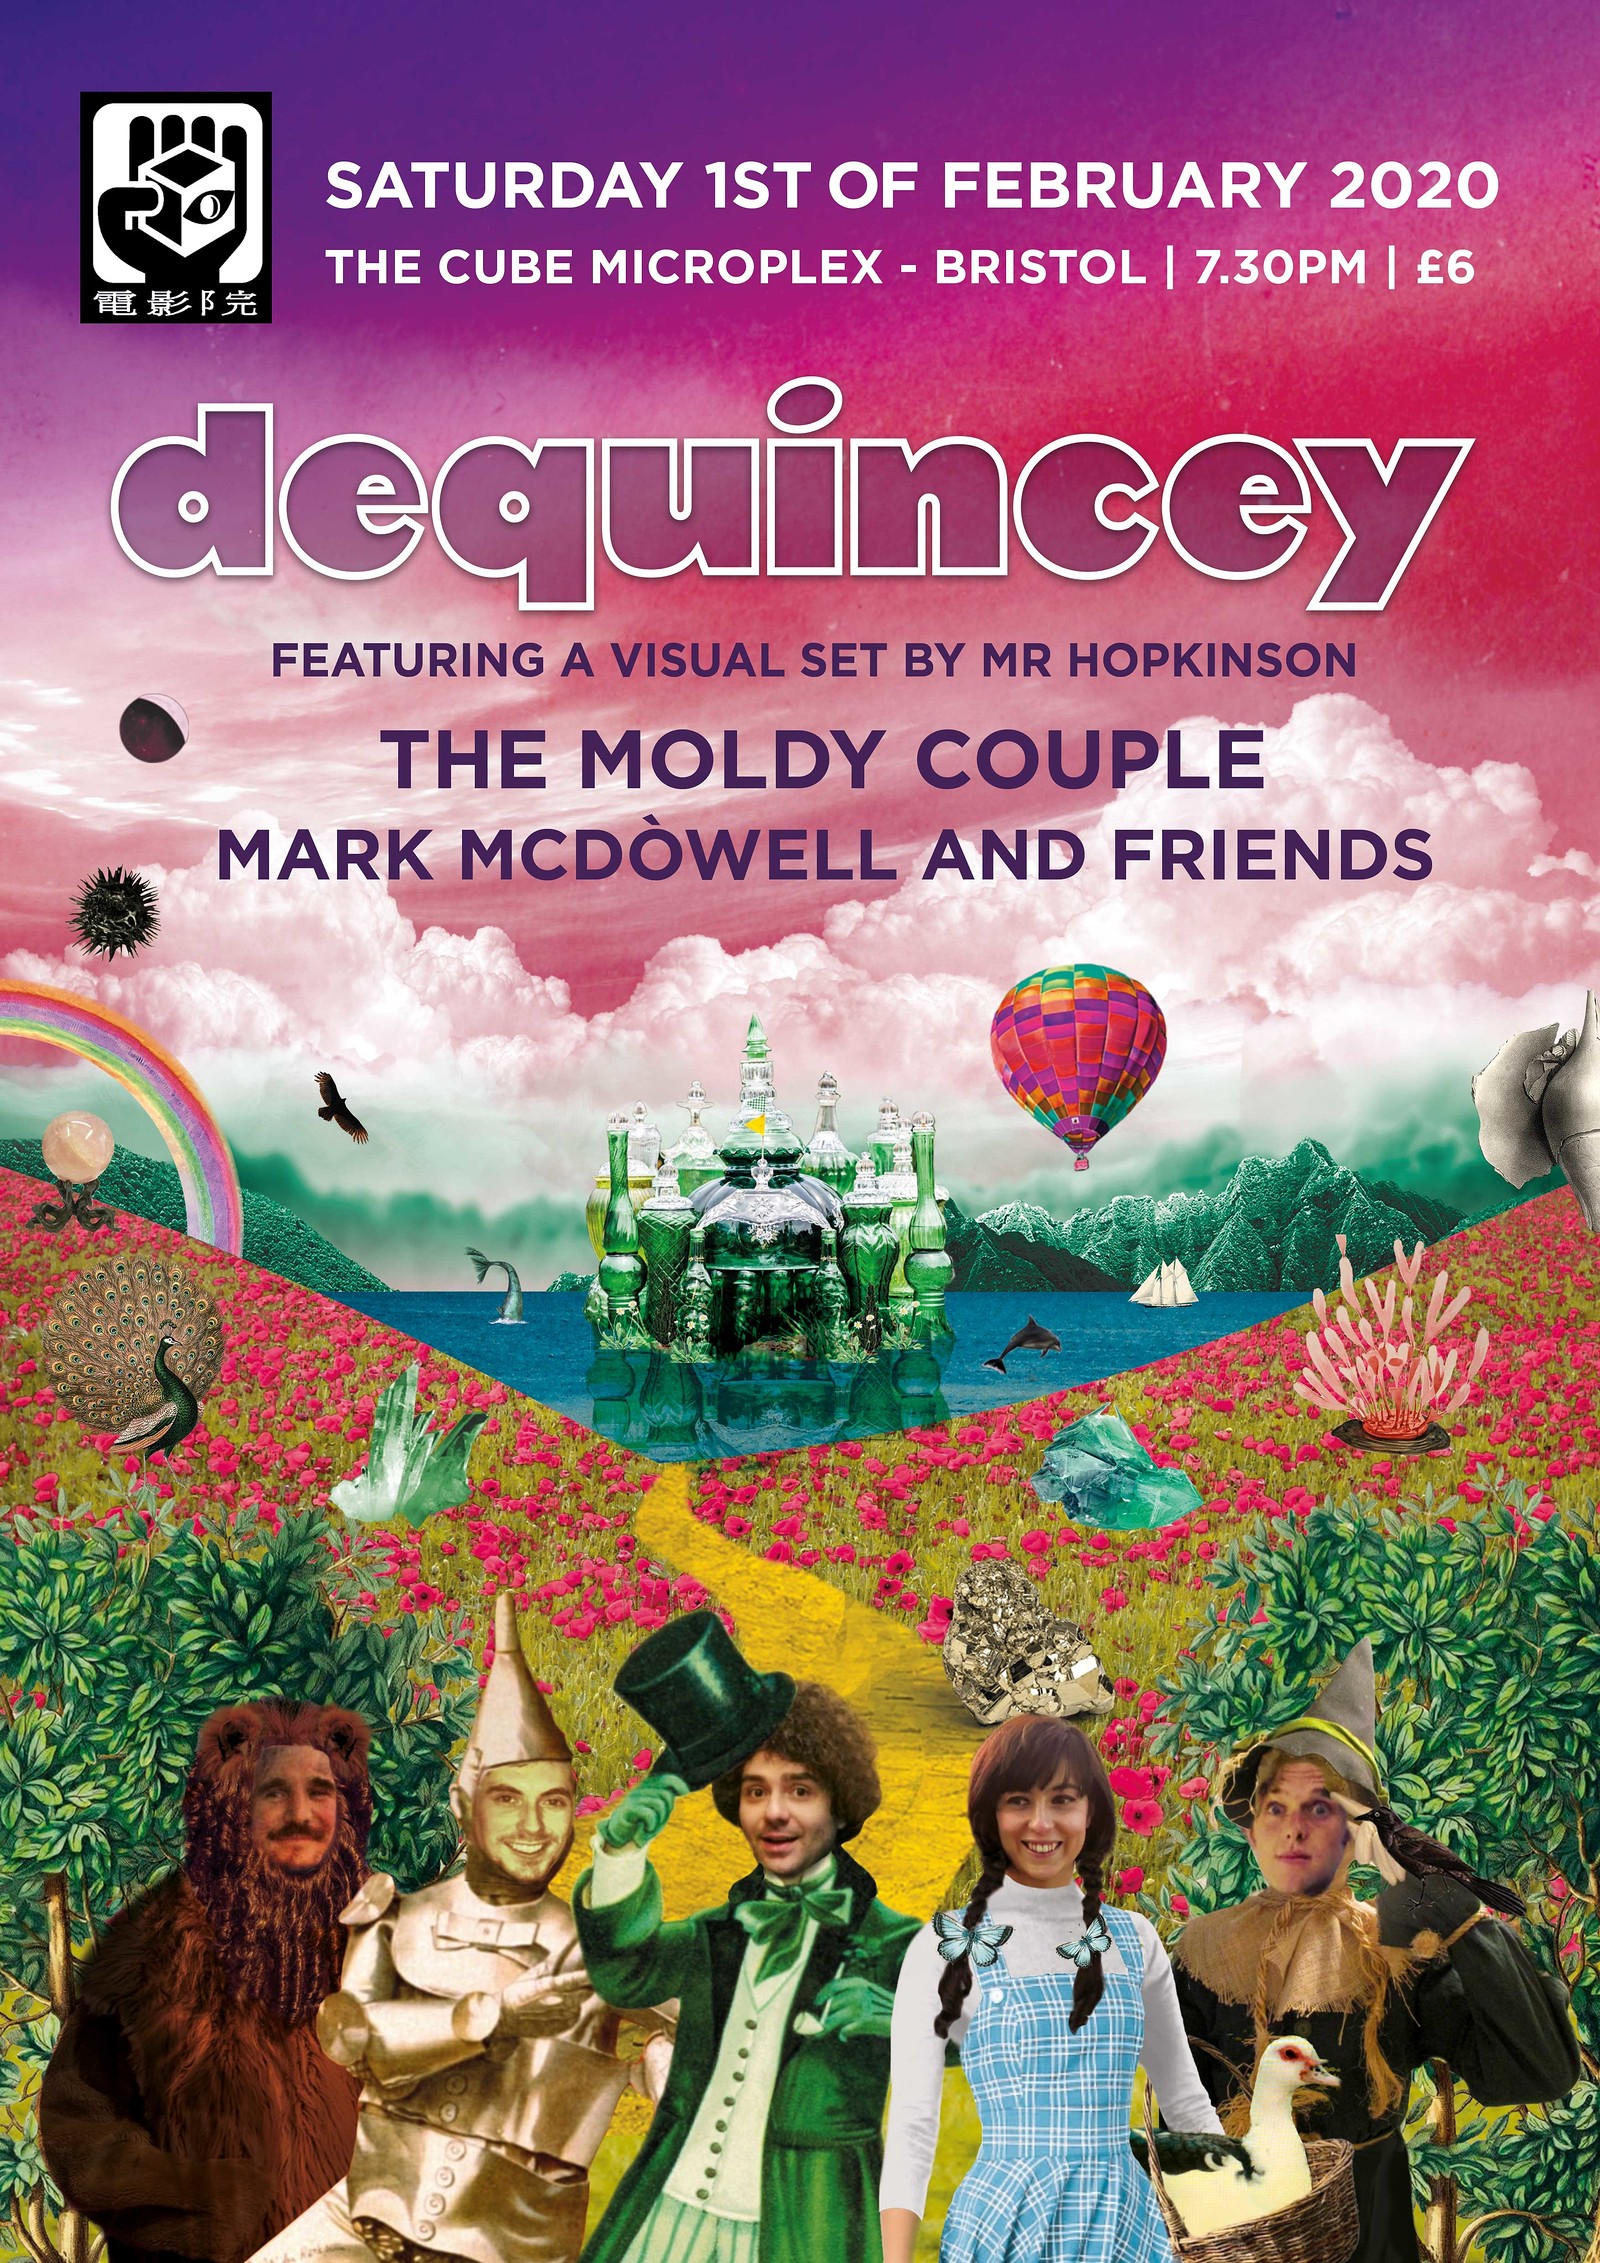 Dequincey, The Moldy Couple, Mark Mcdowell at The Cube